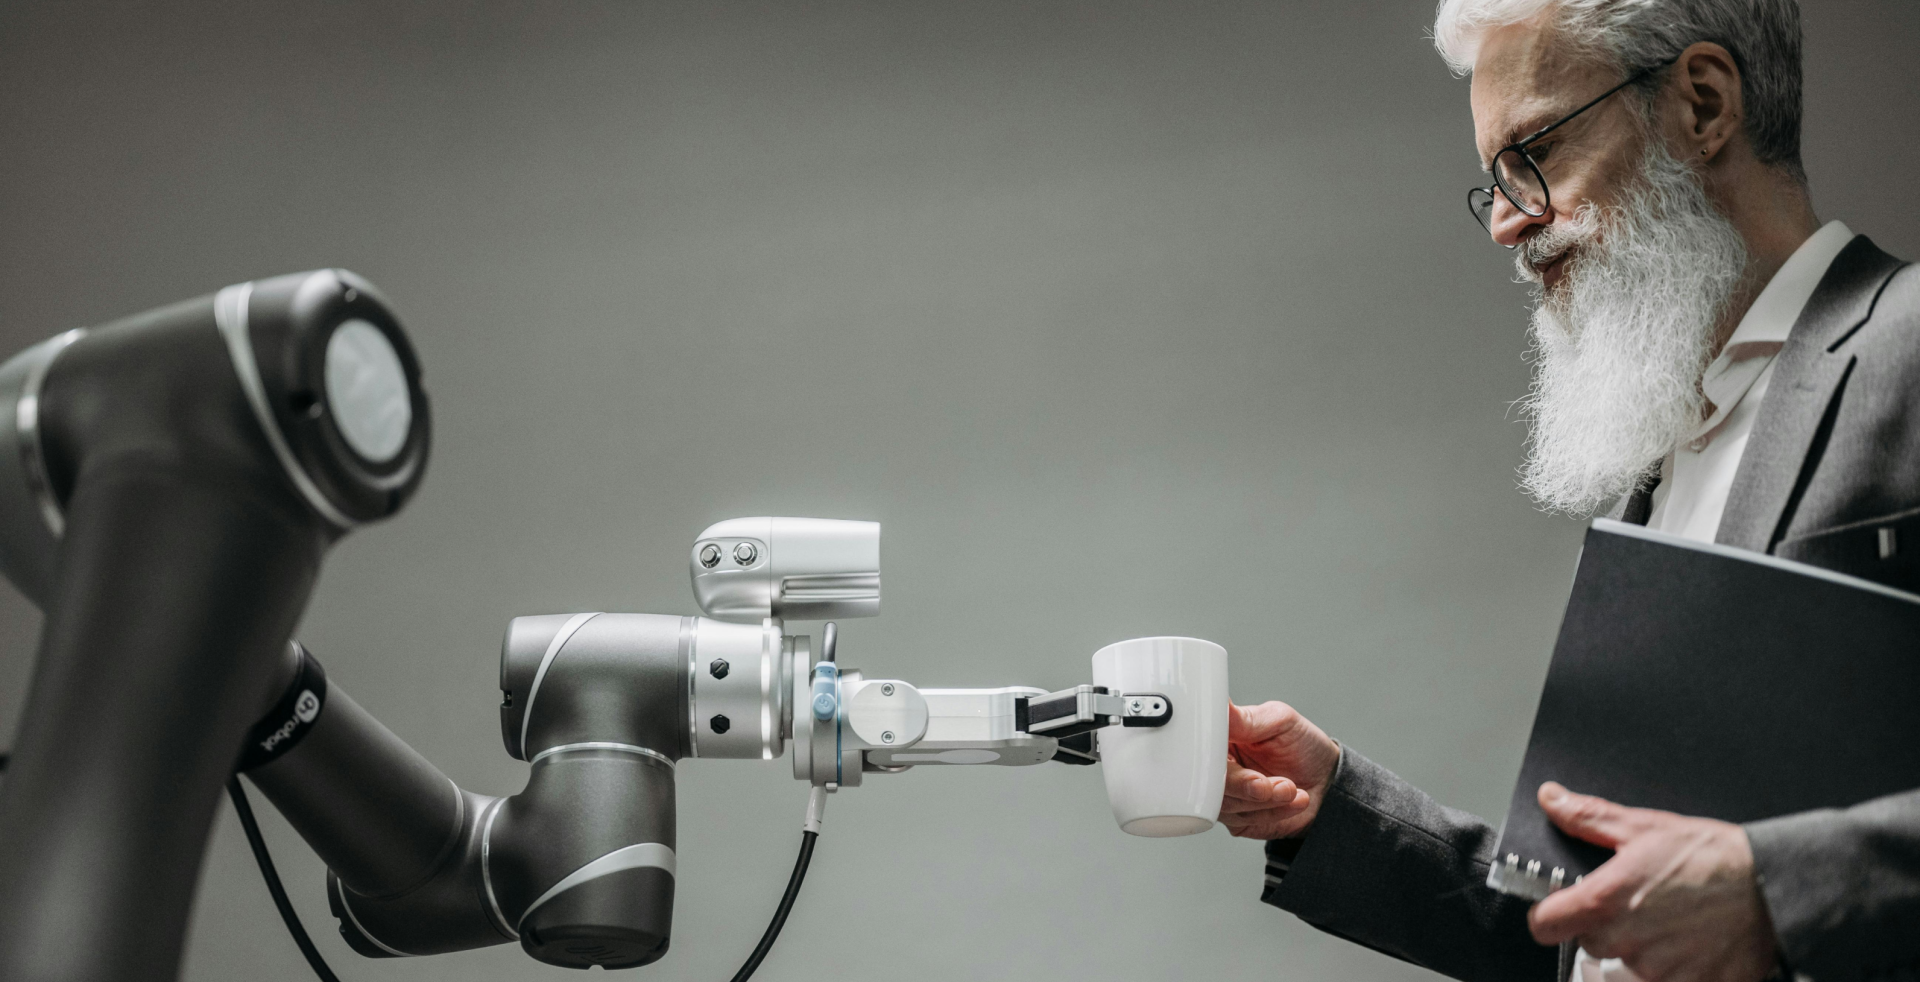 Robot barista serves a cup of coffee to a person with a large white beard